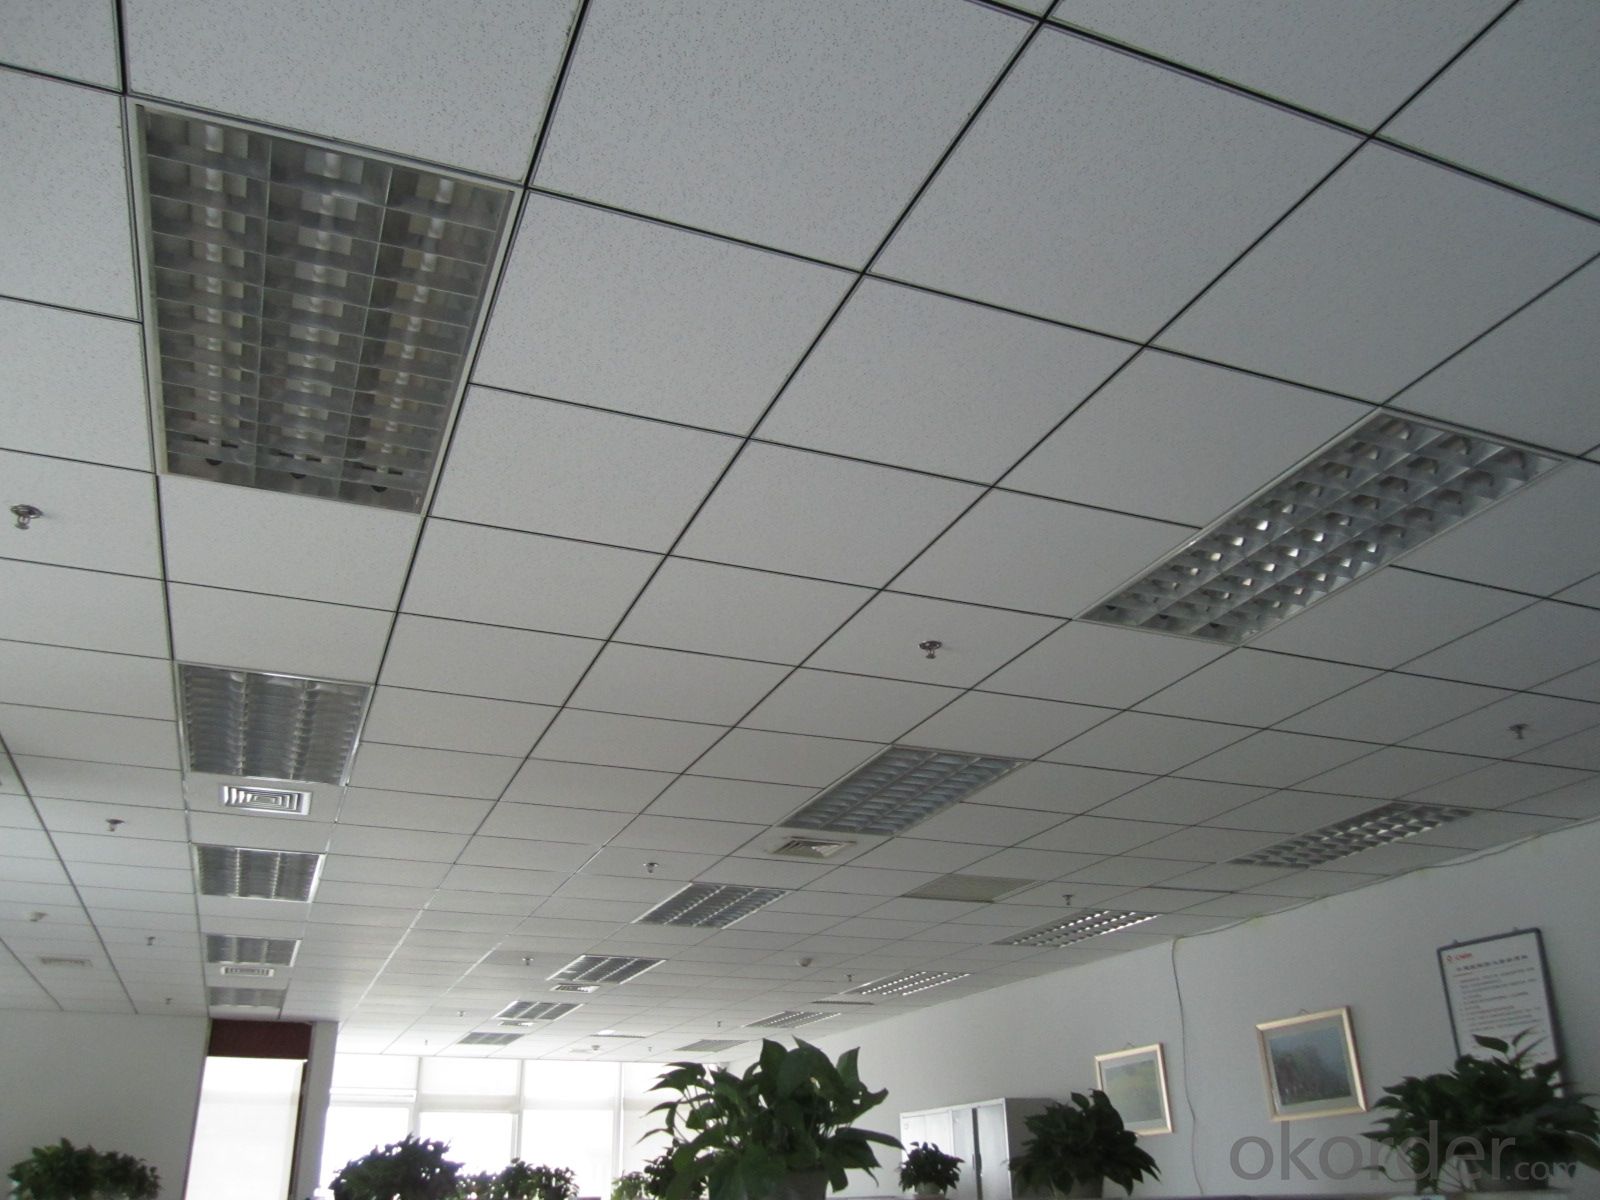 Hot Sale Mineral Fiber Ceiling Tiles from China